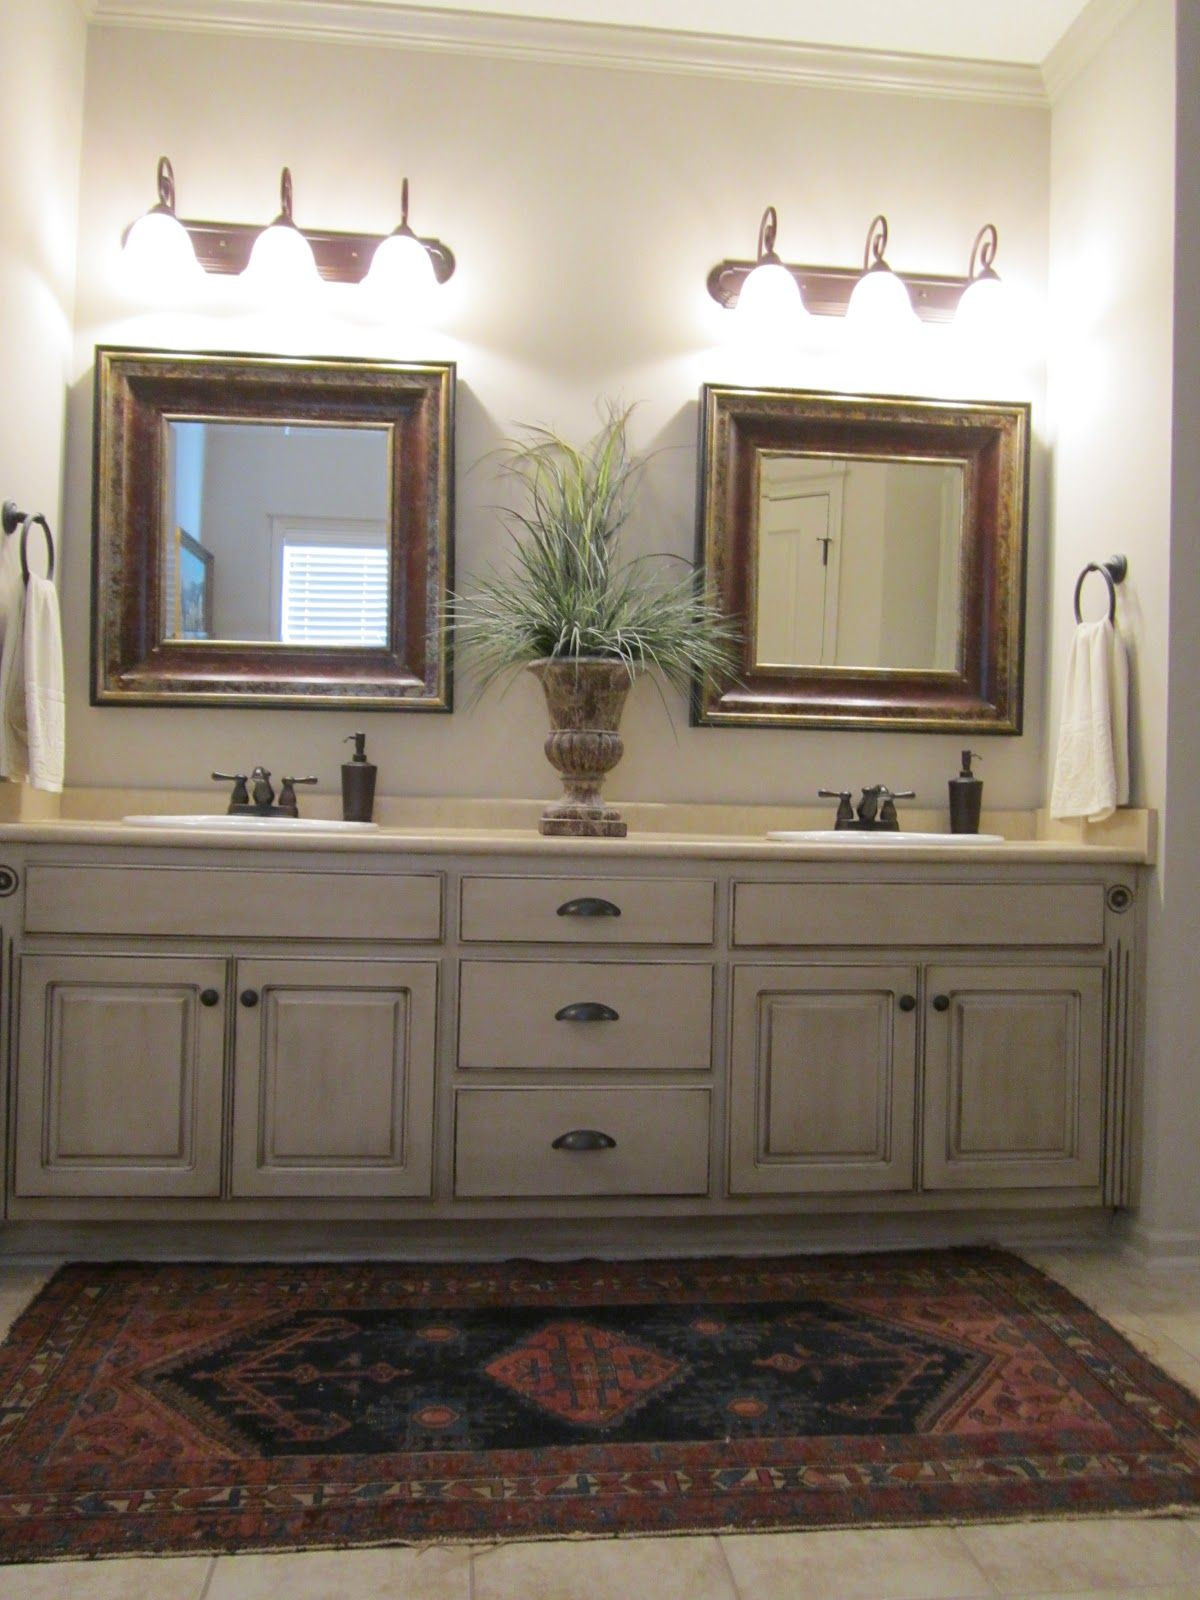 Painting Bathroom Cabinets
 Love these painted bathroom cabinets and the lights What